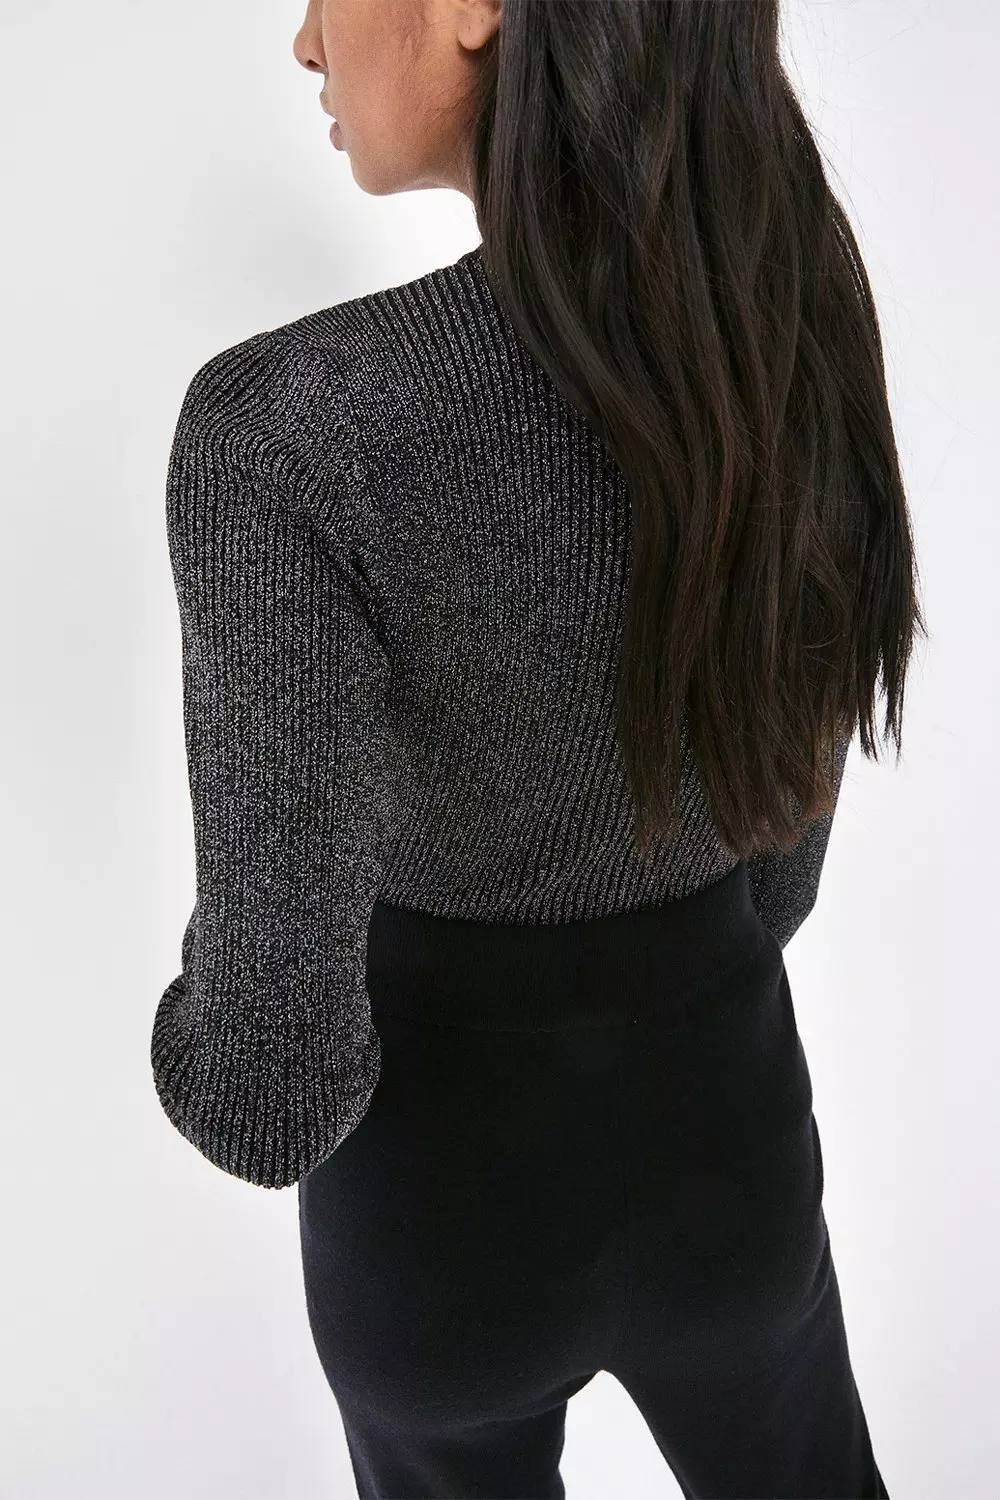 Knitted Sparkle Rib Long Sleeve Crew Neck Top | Warehouse